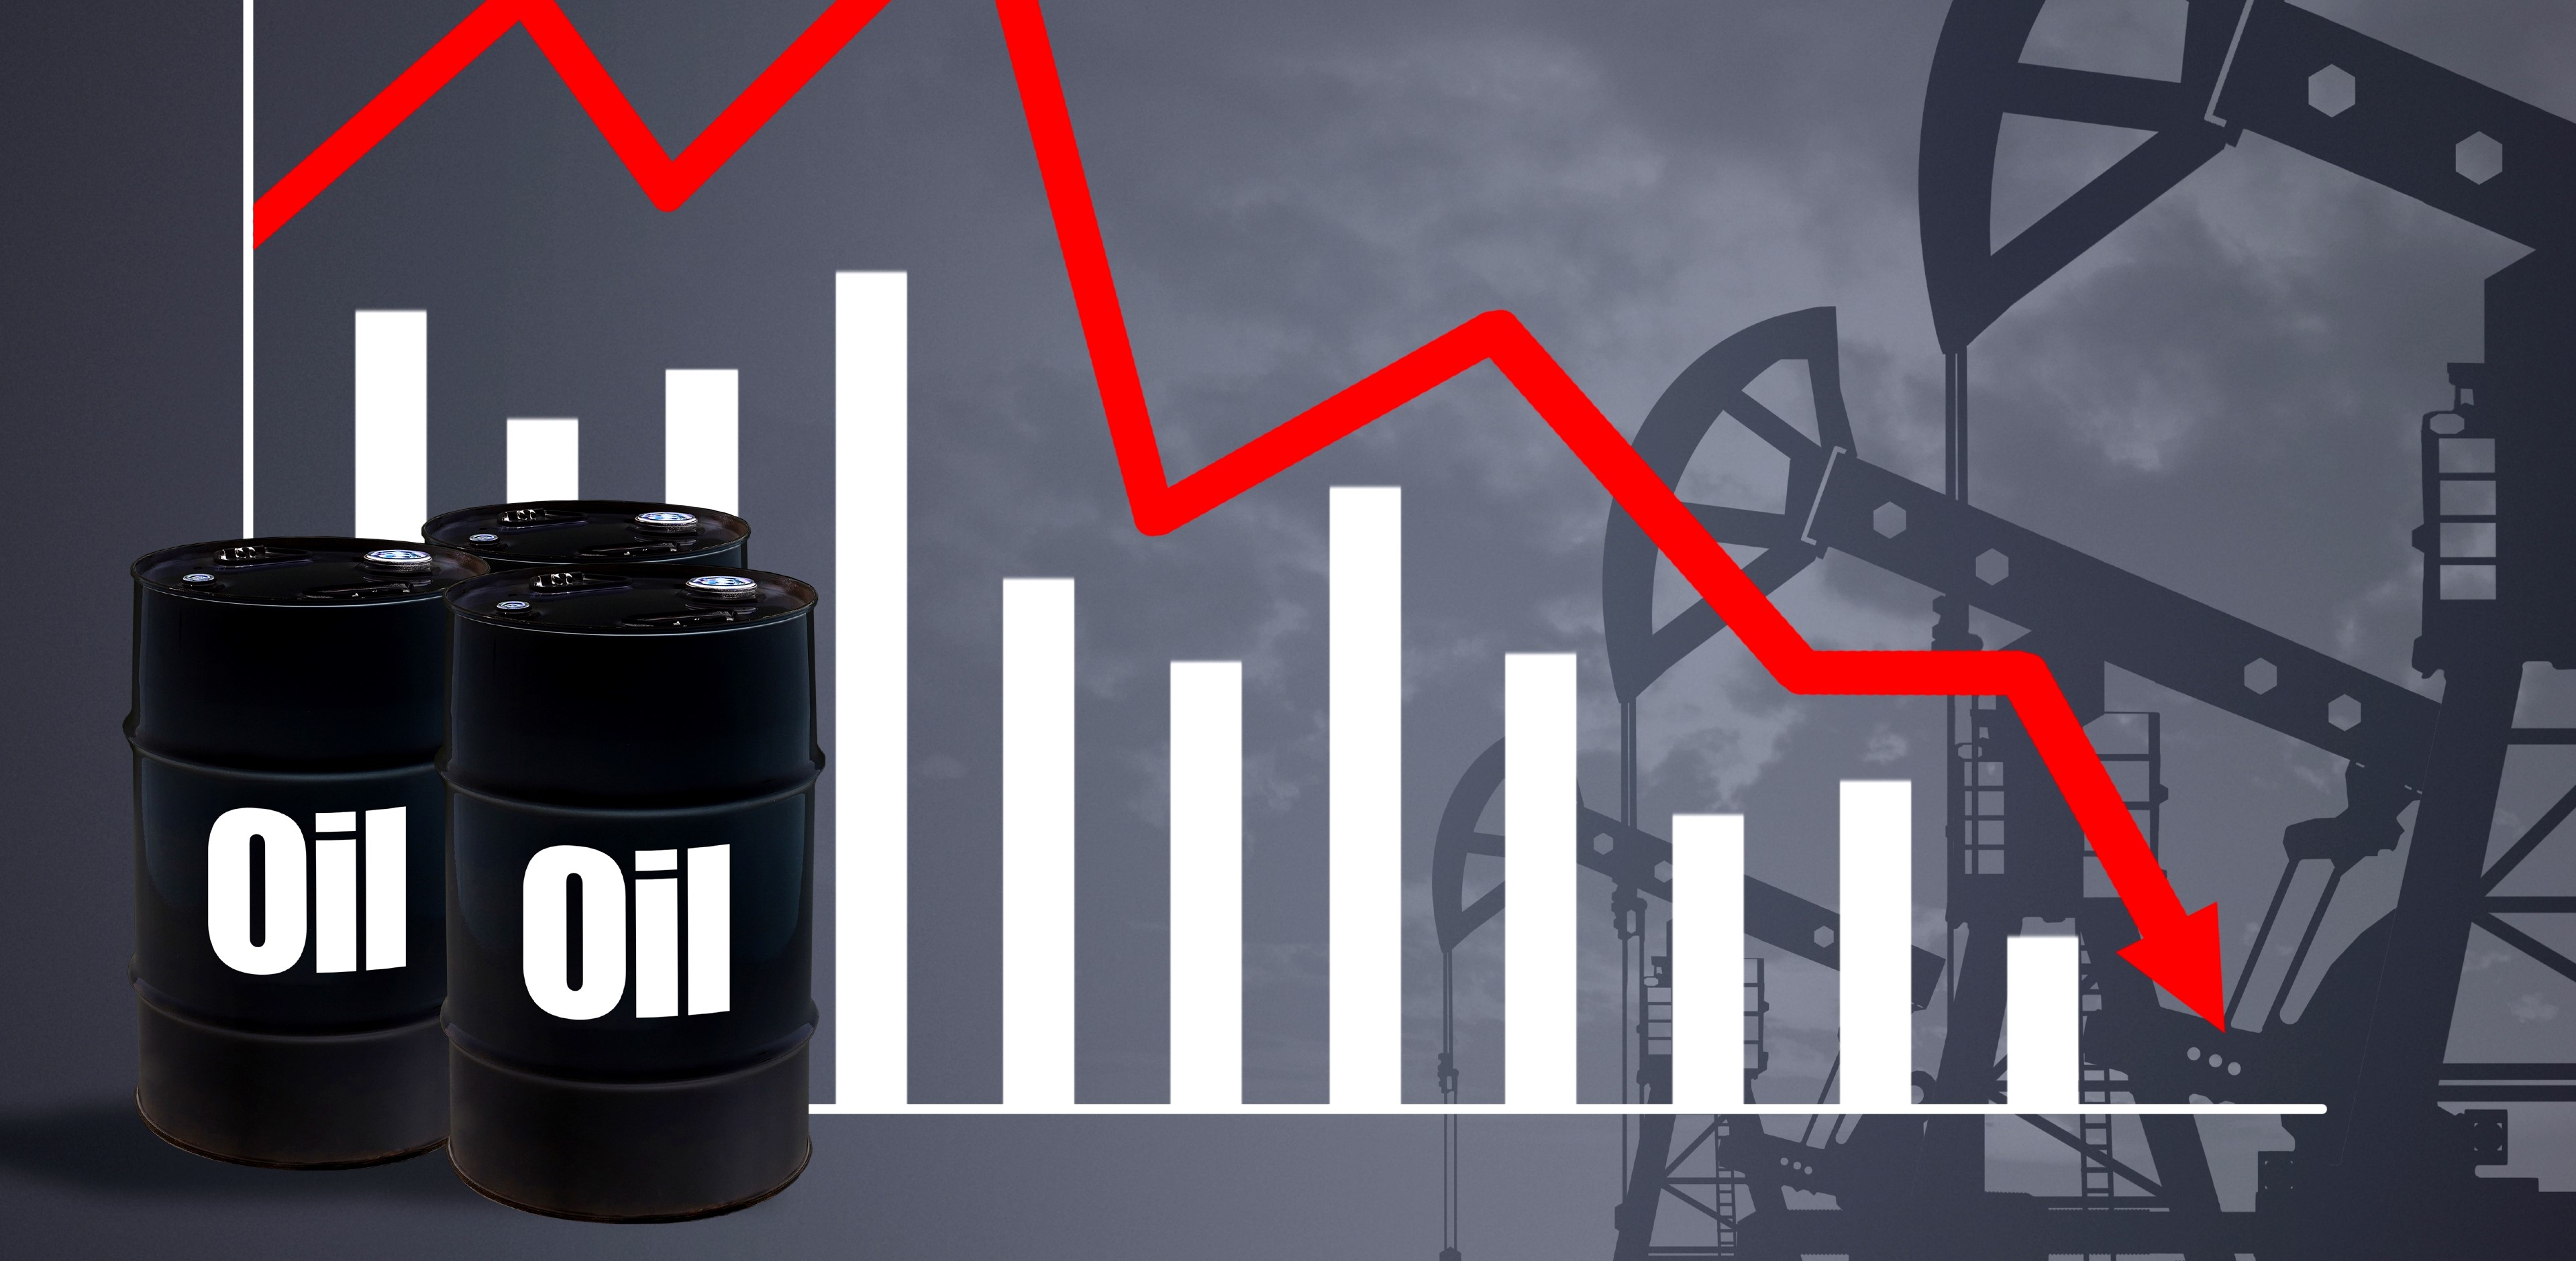 Oil prices plunges to 12-month low